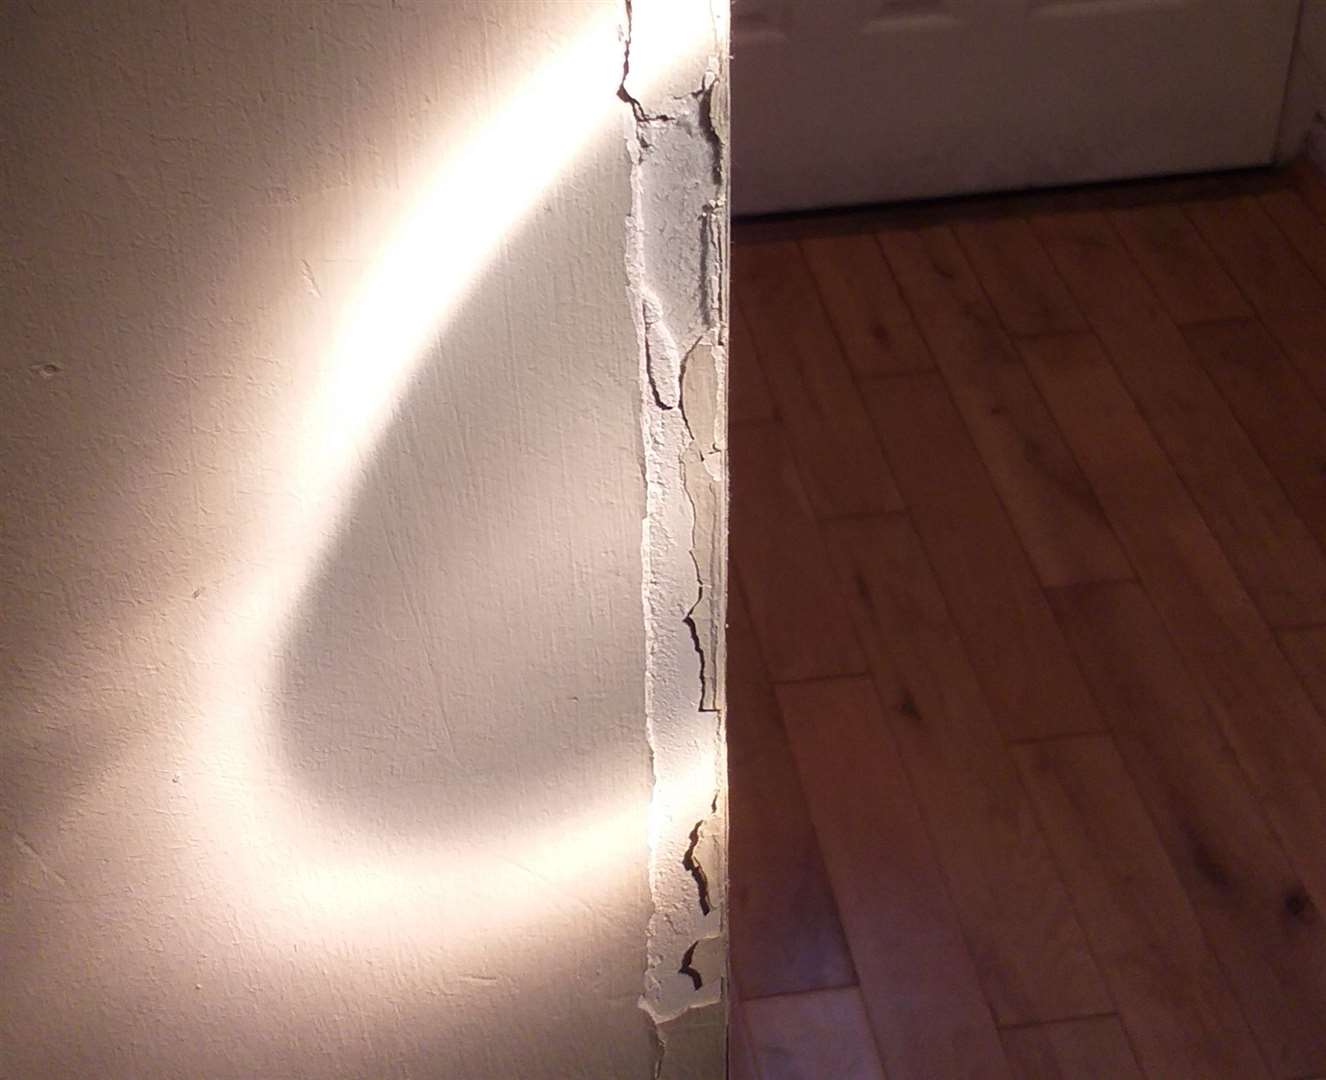 The couple's wall was damaged during the failed delivery